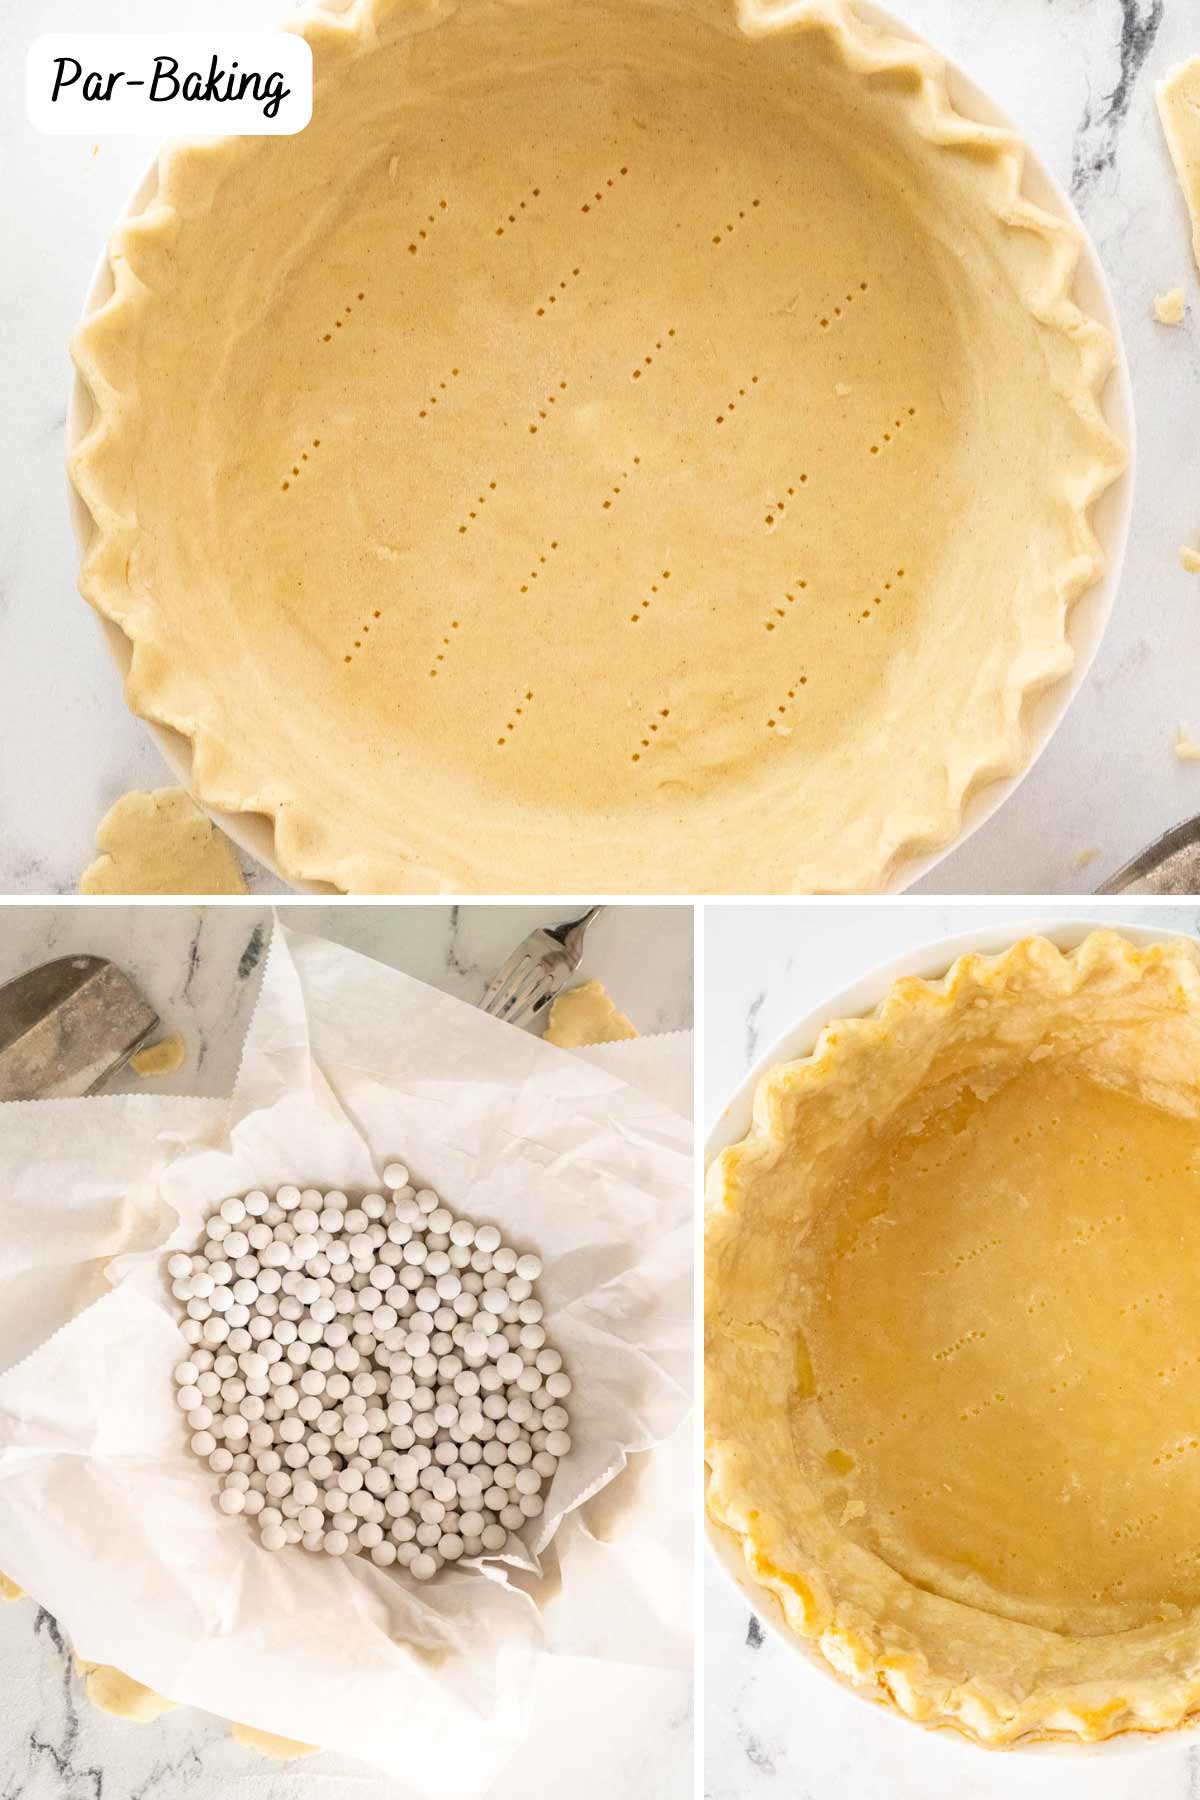 Par baked crust and raw pie crust lined with parchment and pie weights.